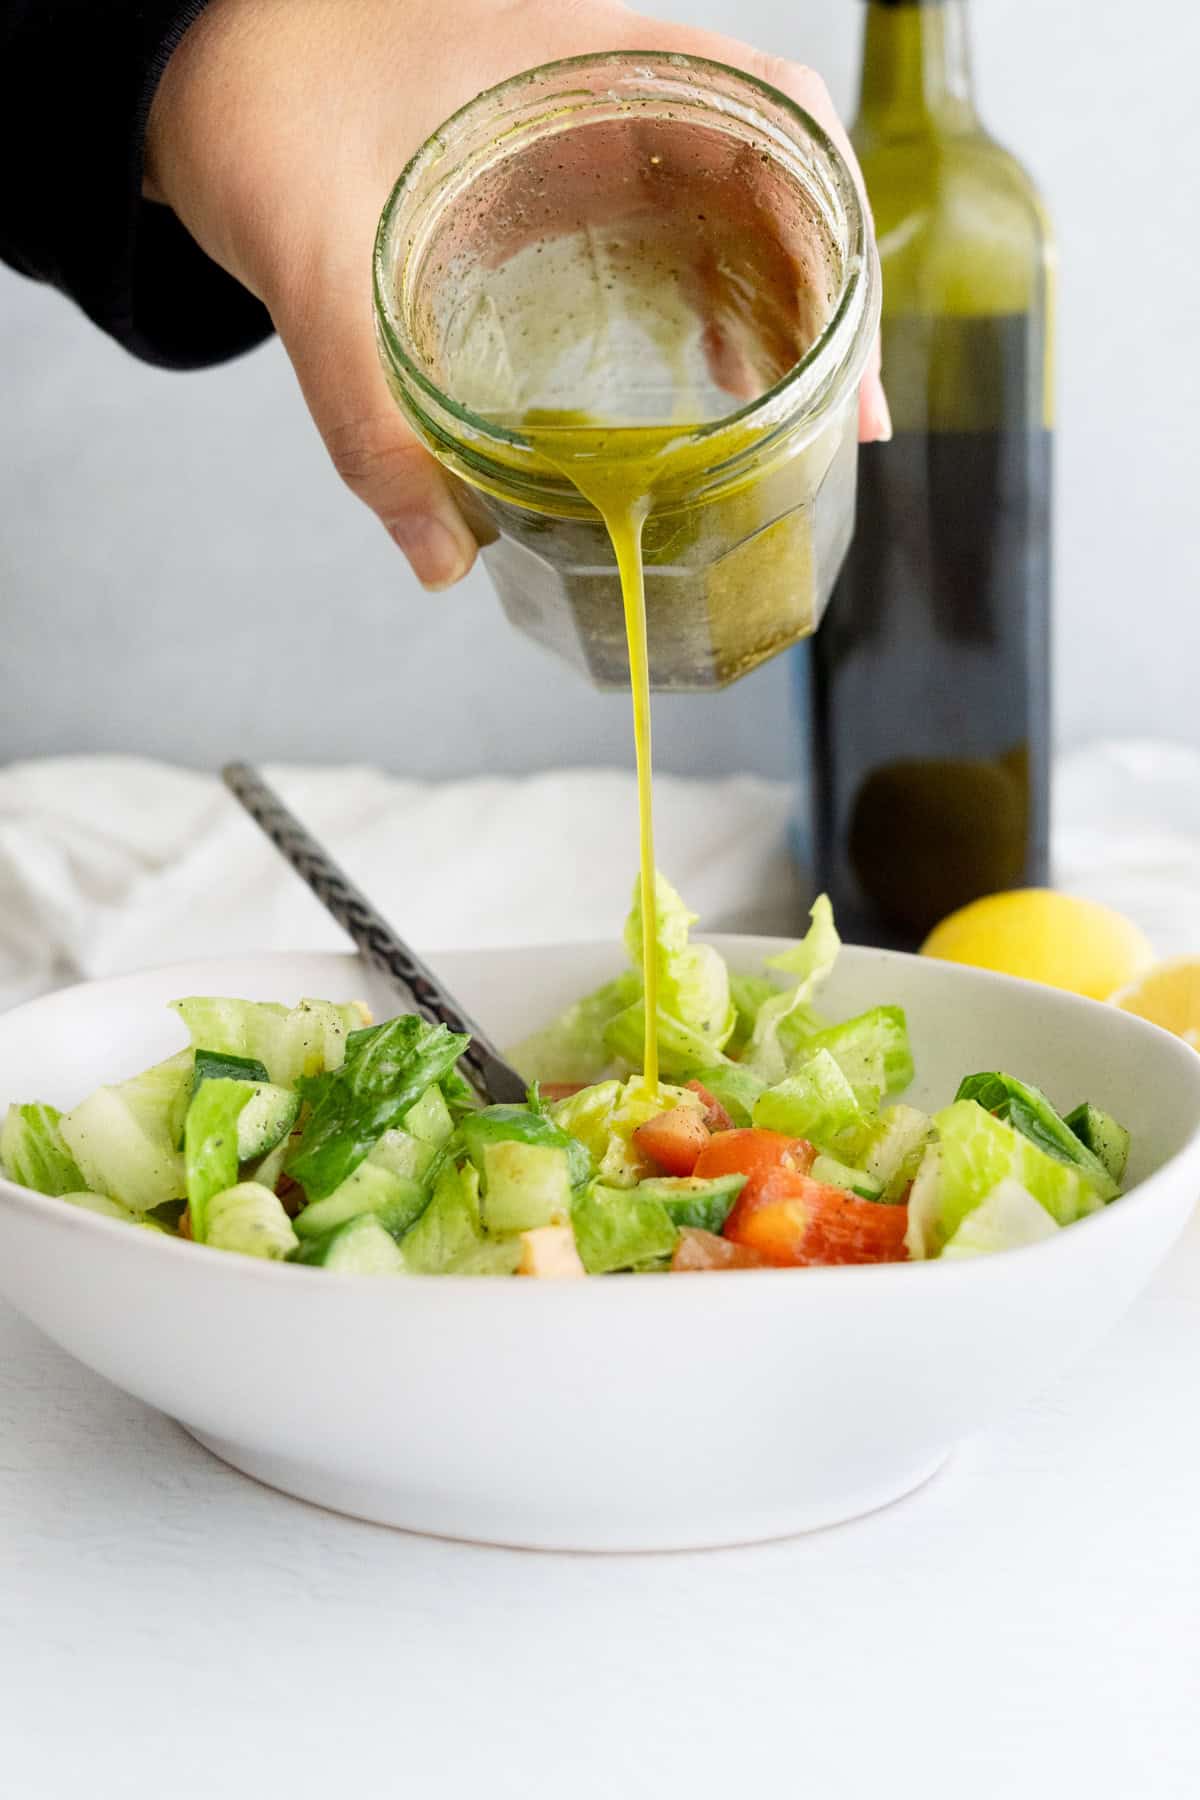 a hand pouring Lebanese salad dressing out of a glass jar onto salad